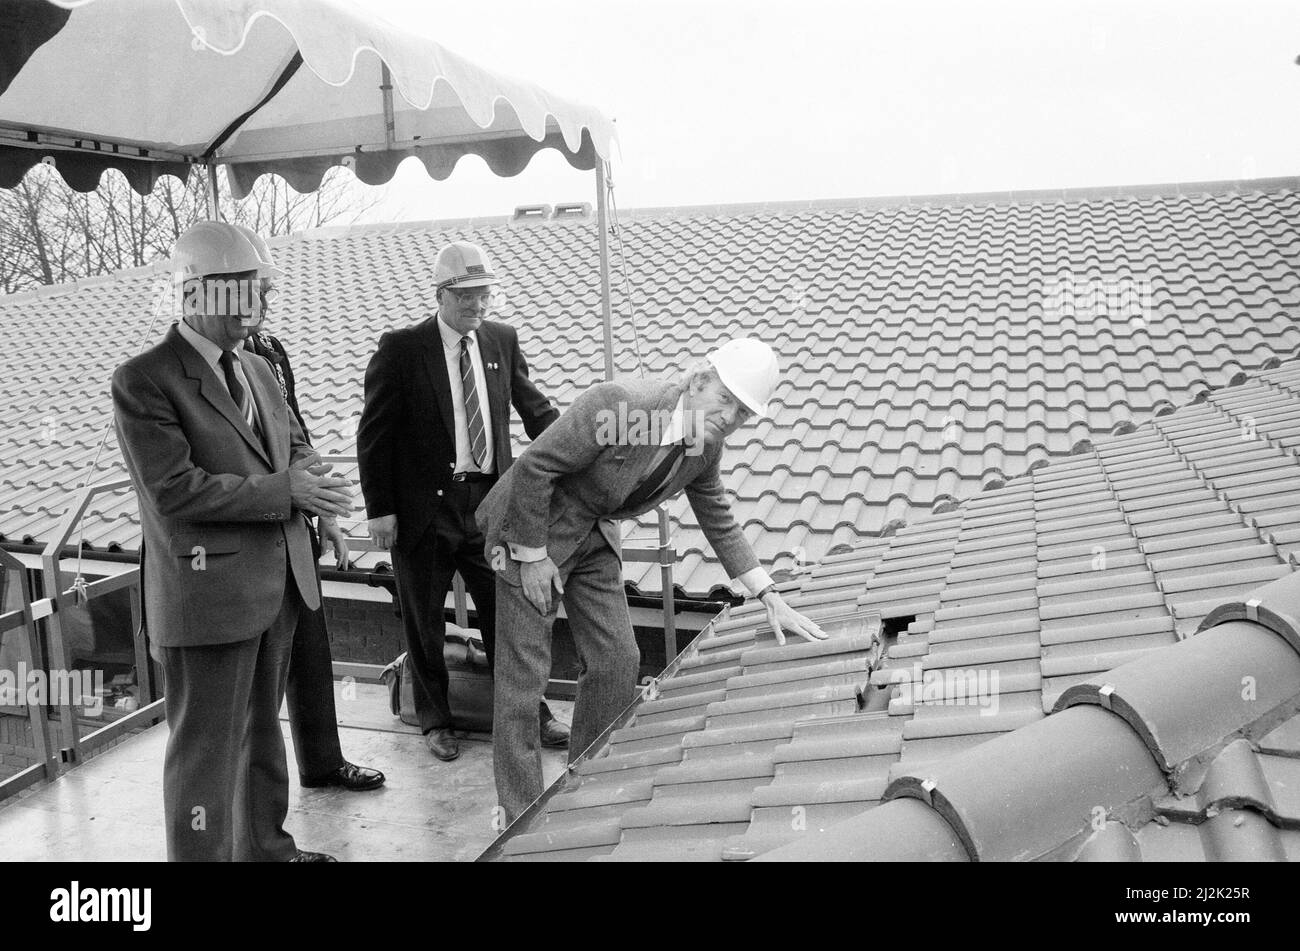 Acorns Children's Hospice. Topping Out Ceremony, with guest of honour Lord Lichfield, Patrick Anson, 5th Earl of Lichfield, 8th March 1988. Stock Photo